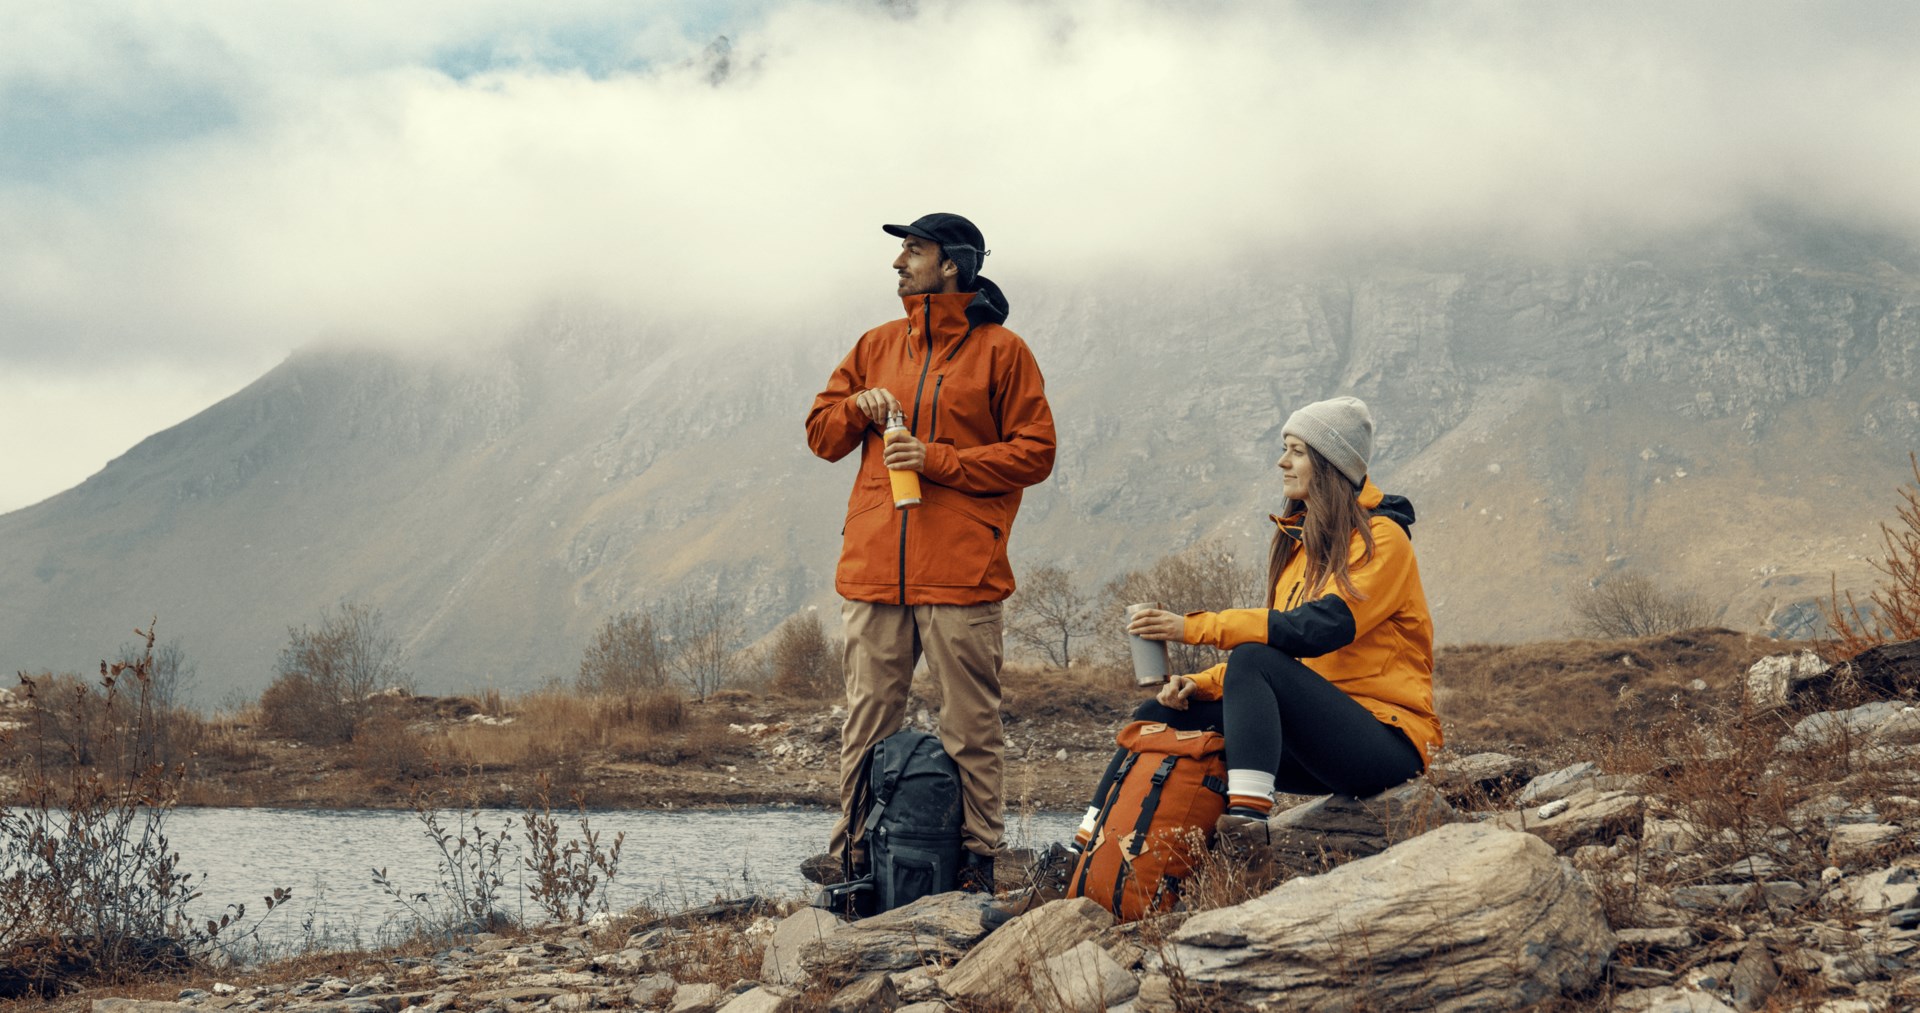 Man and woman stare into the distance while taking a hiking break